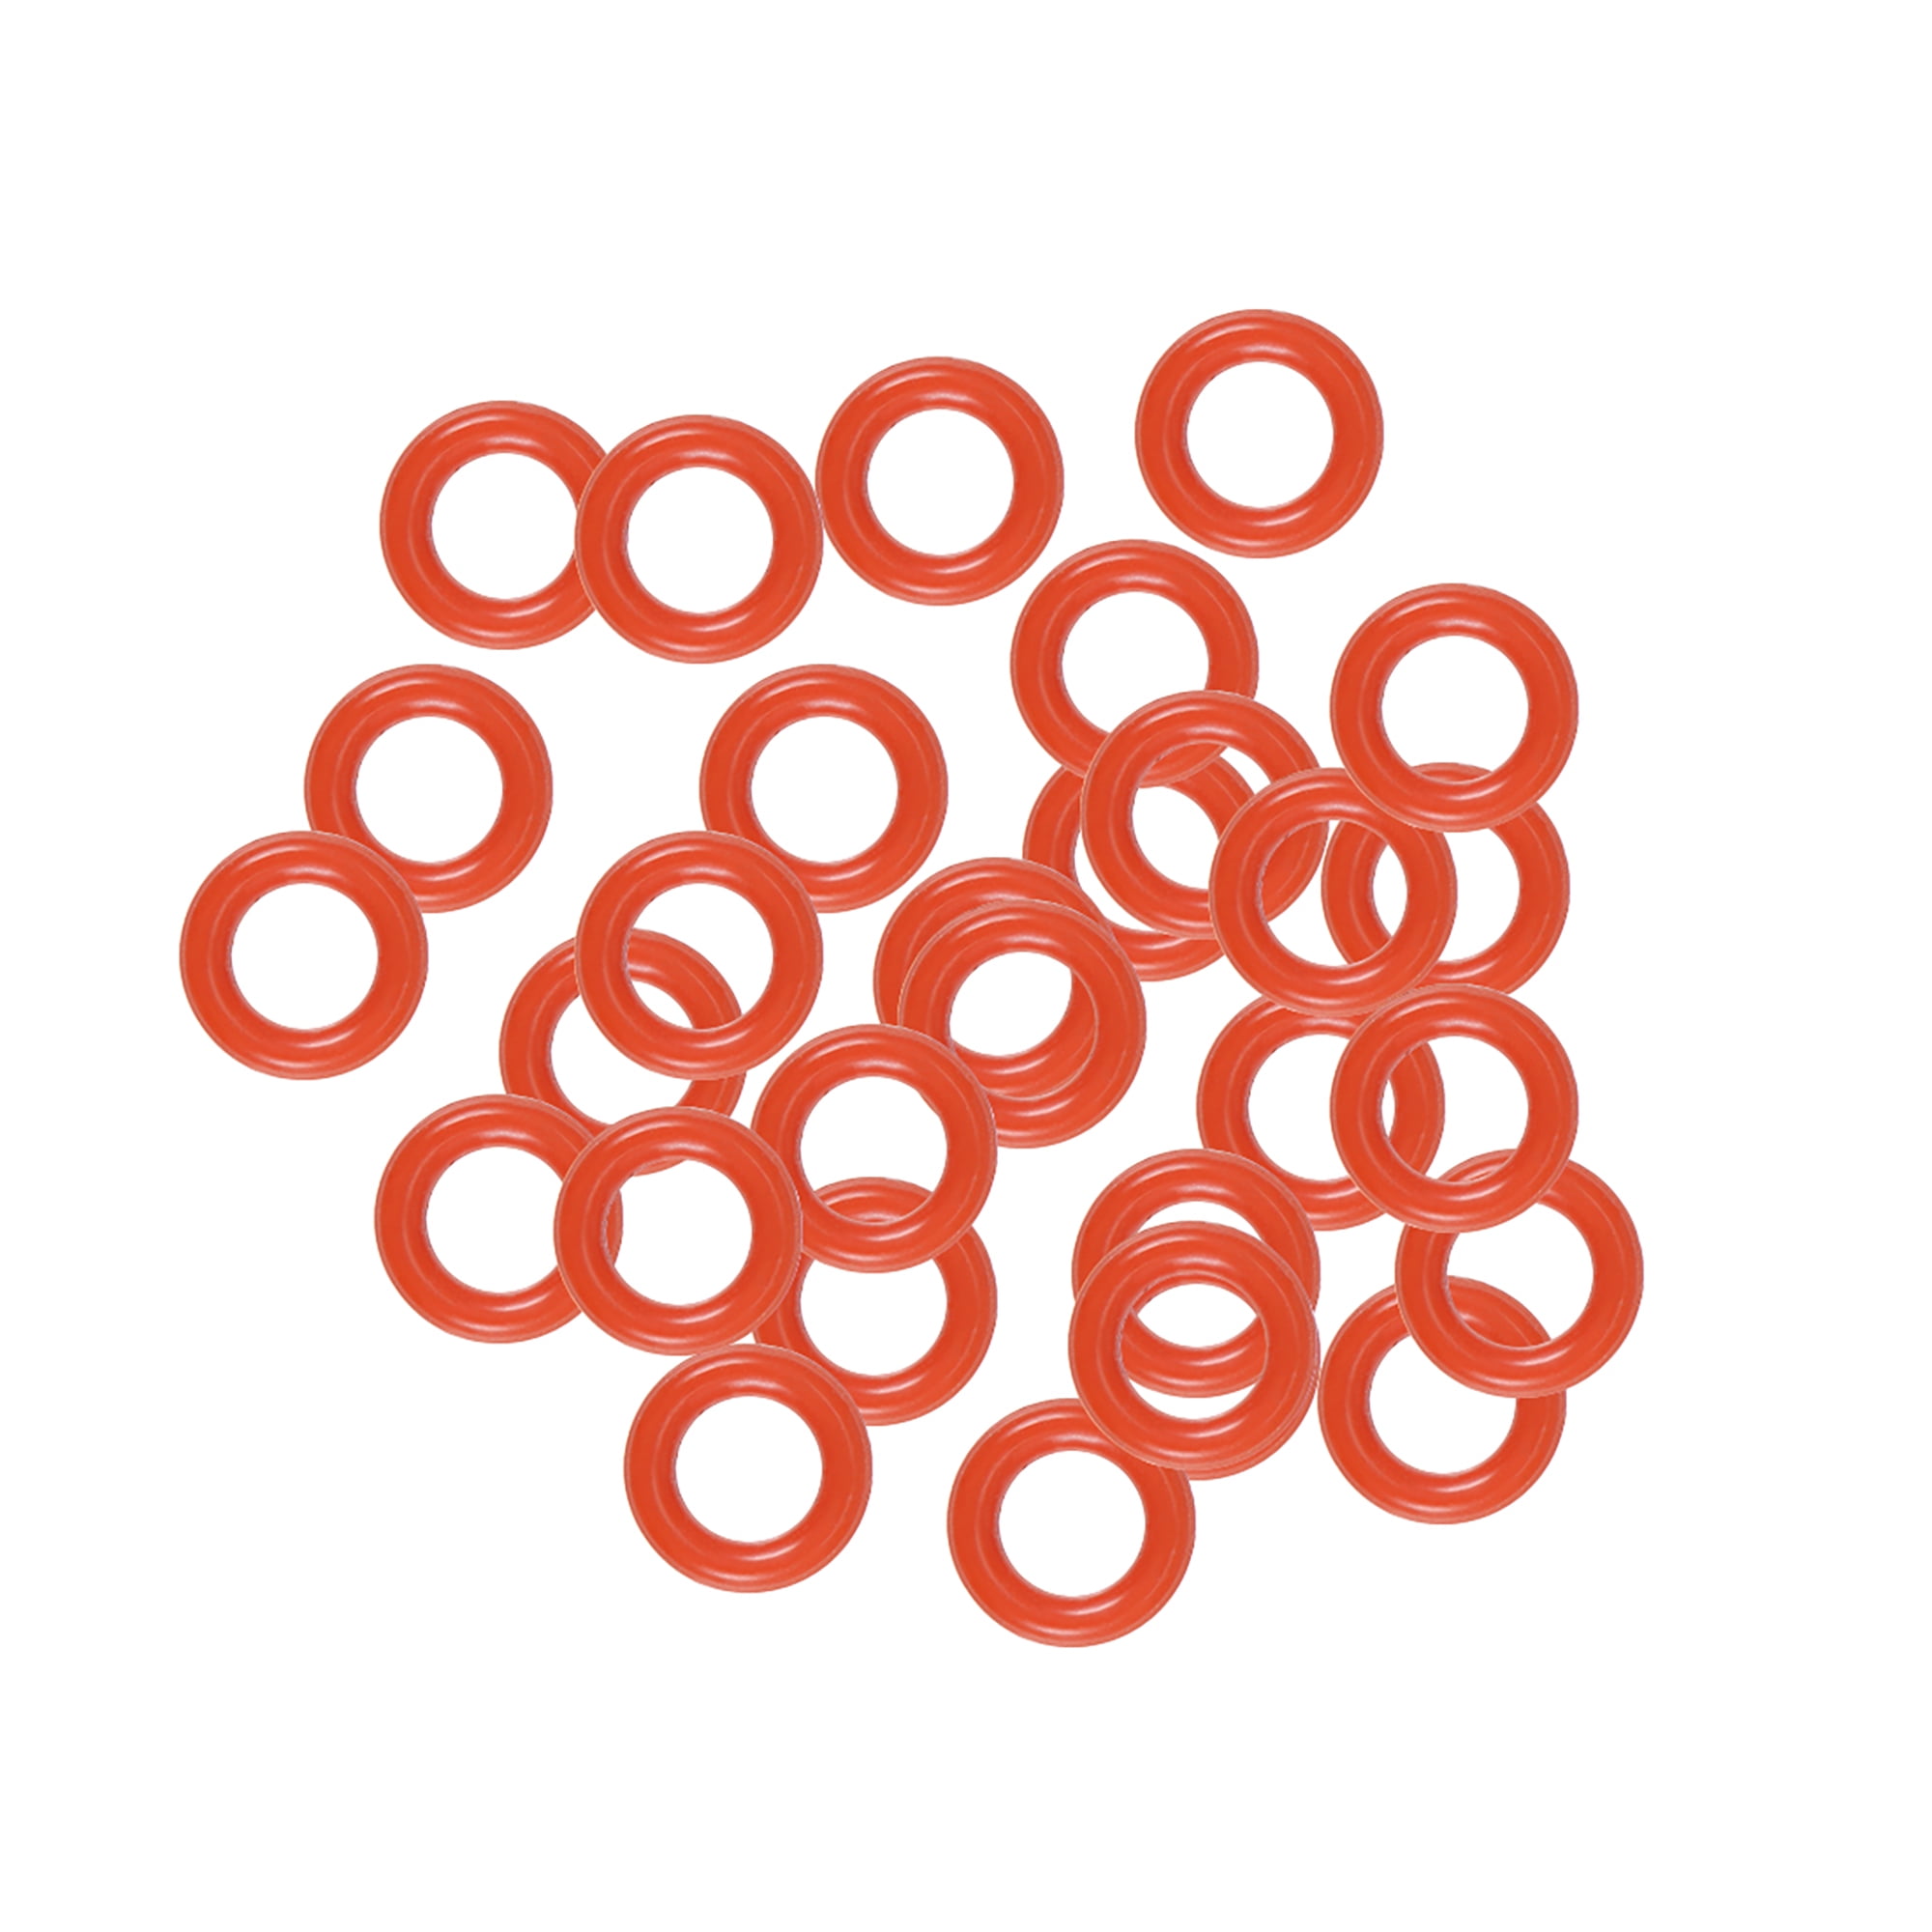 8mm-65mm OD Food Grade Silicone O-Ring Red O Rings Seals 2mm Wire Diameter 